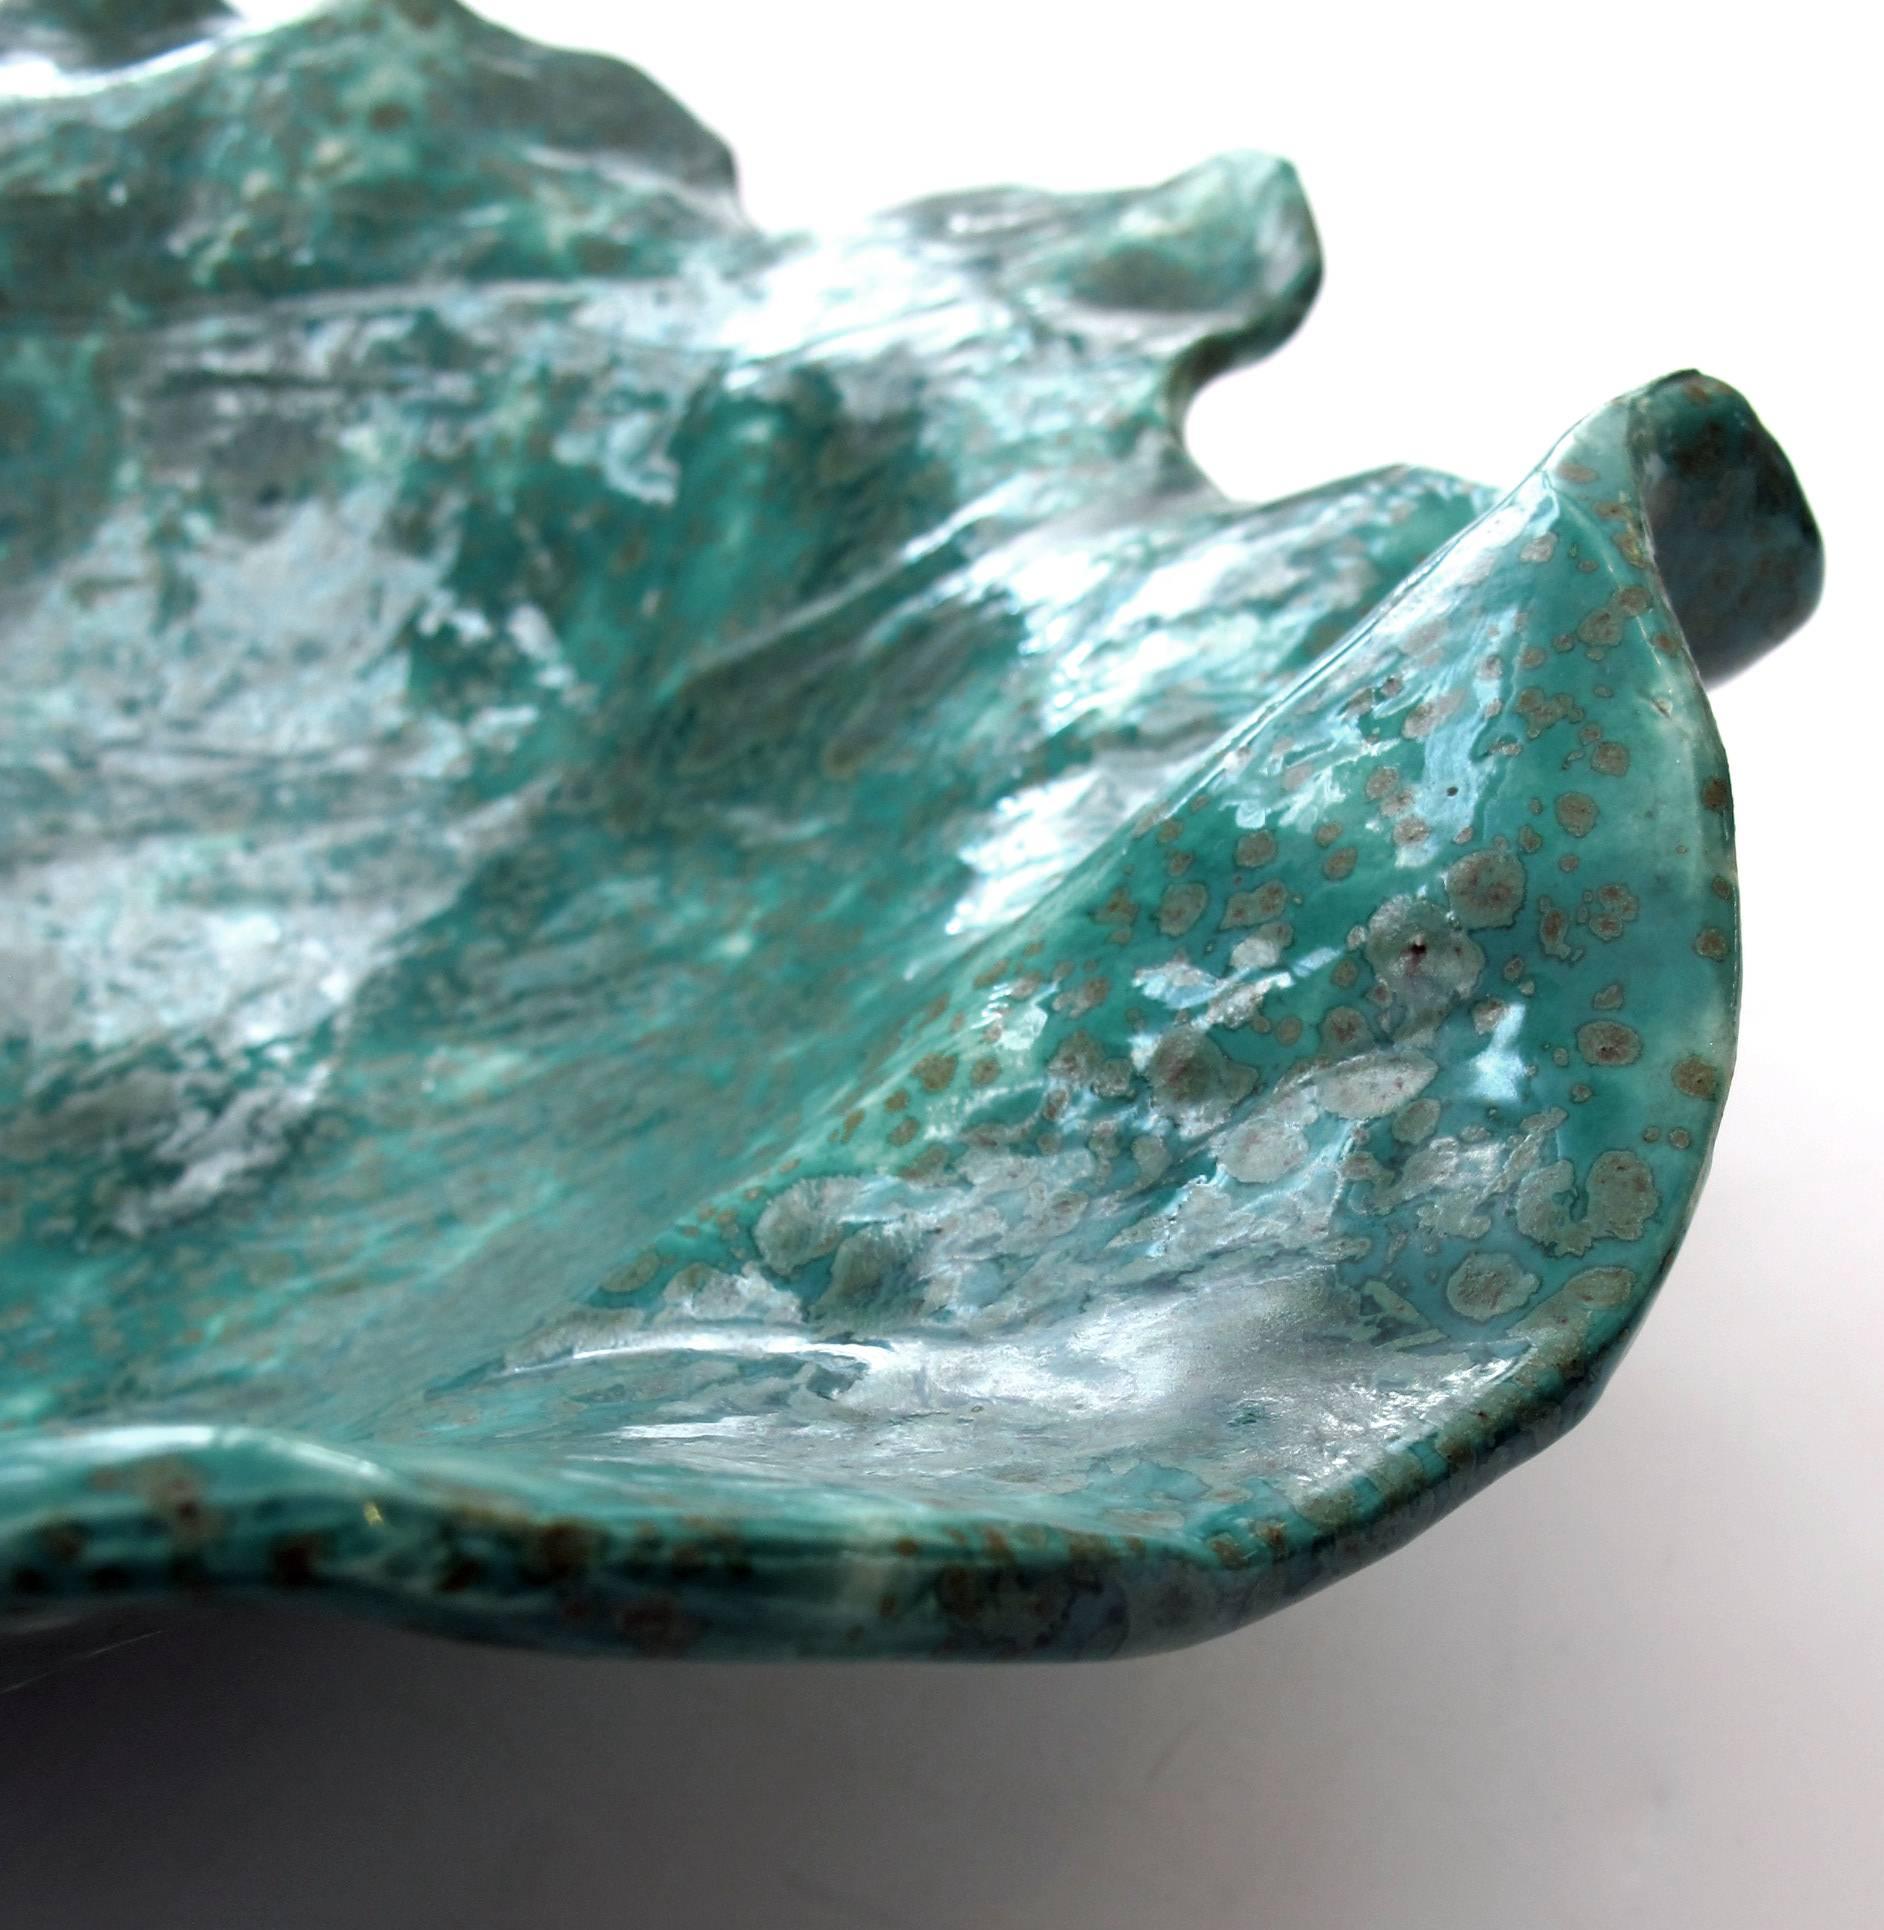 The wide bowl with undulating and scalloped edge all raised on three short feet; covered in a teal, white and olive green mottled glaze; signed 'j 01'.